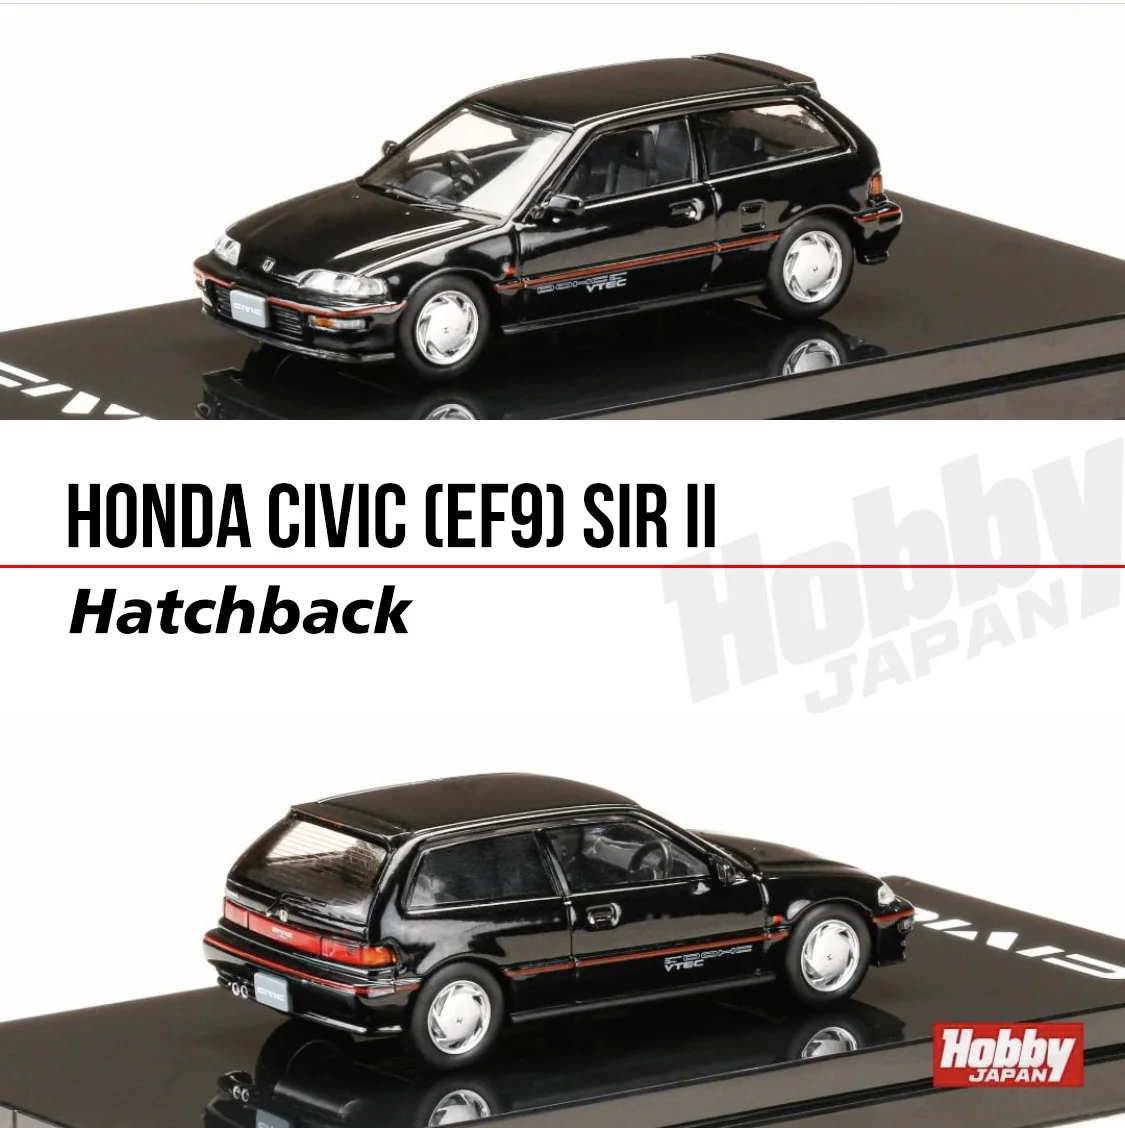 

Hobby Japan 1:64 Civic EF9 SiR II Hatchback Car Diorama OG Modified Alloy Model Collection Miniature Expressway Ring Line Friend